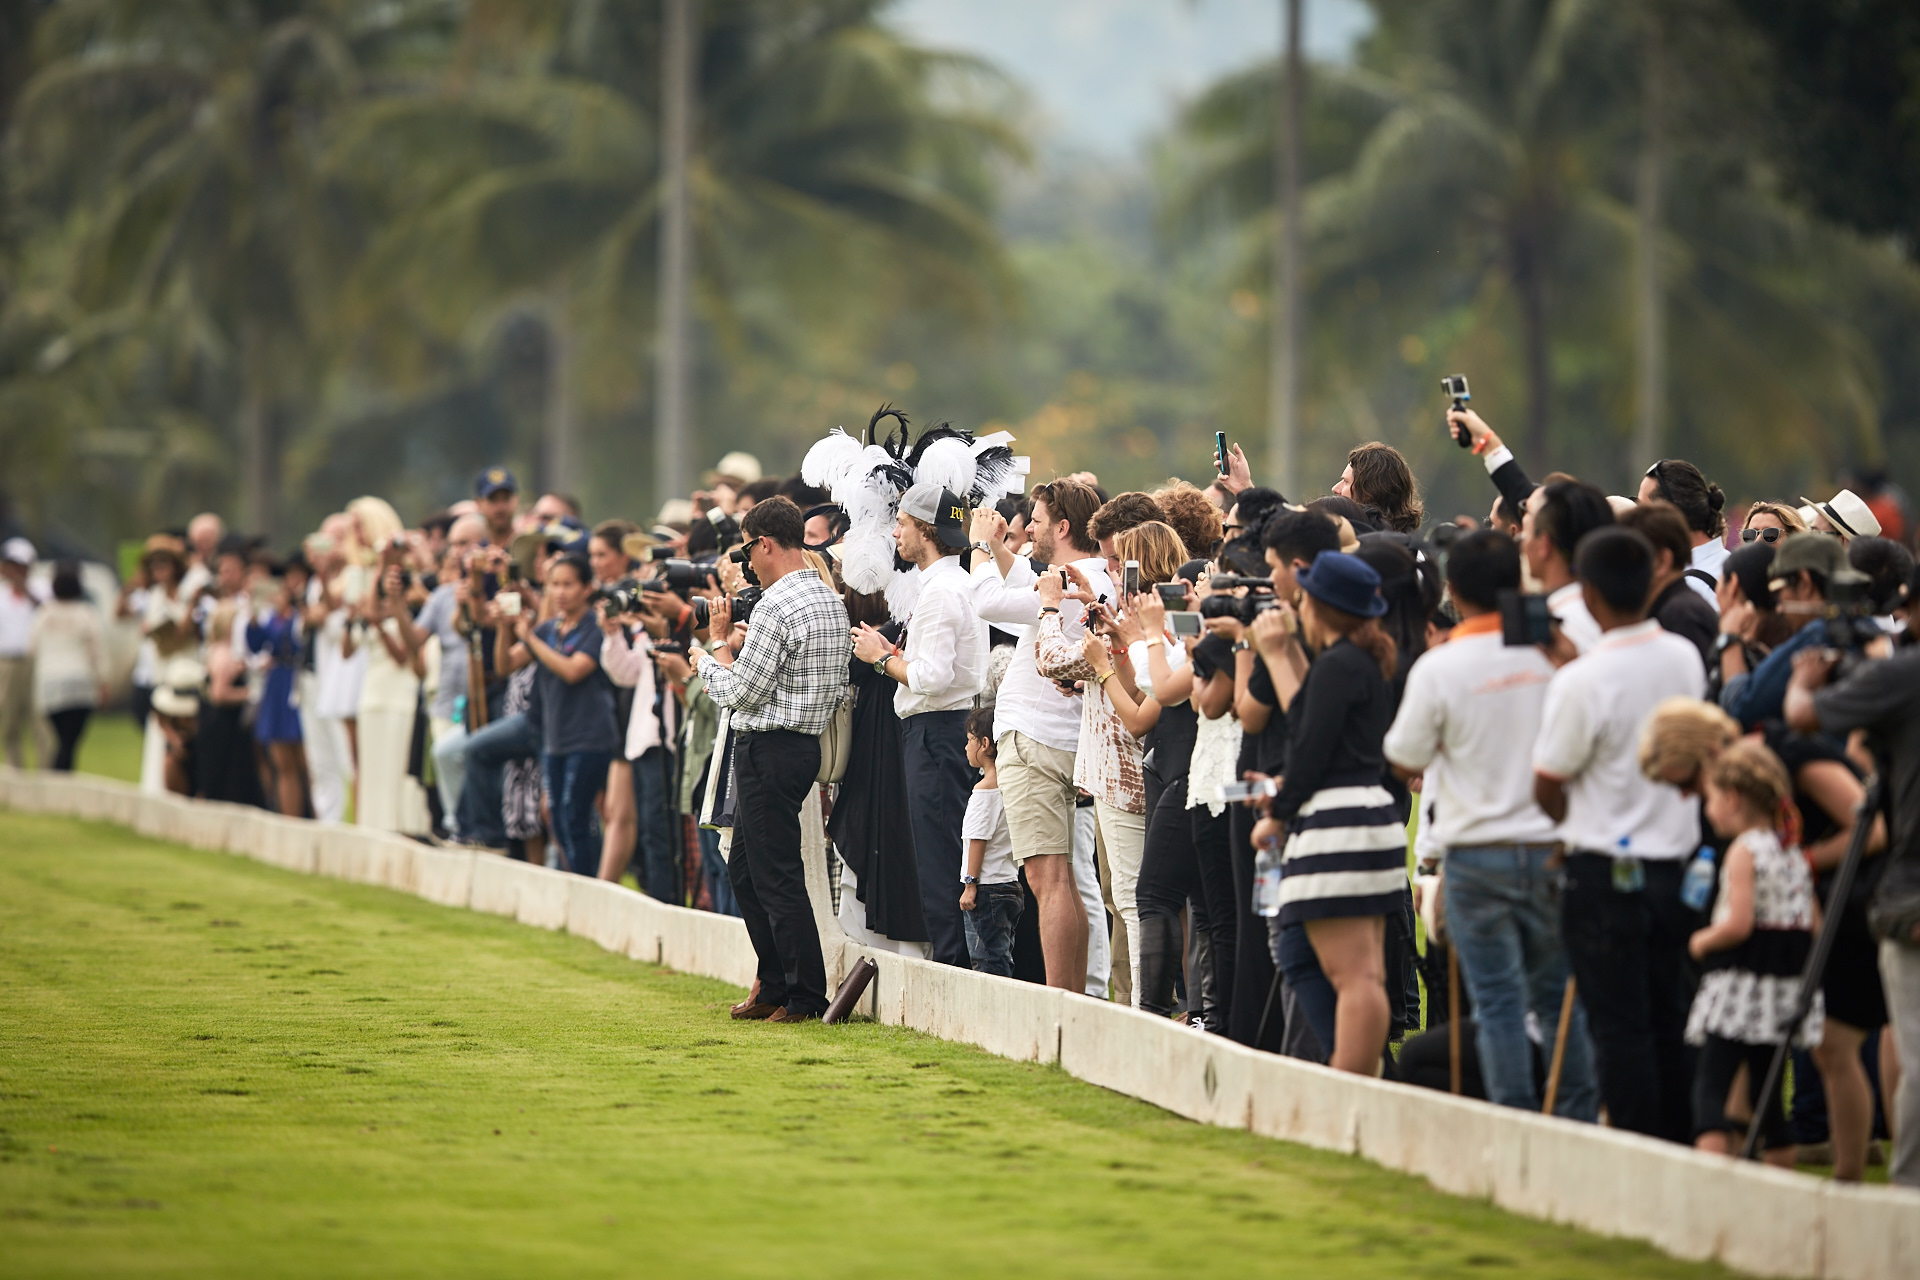 Equestrian fans and socialites turned out in large numbers to enjoy the day.